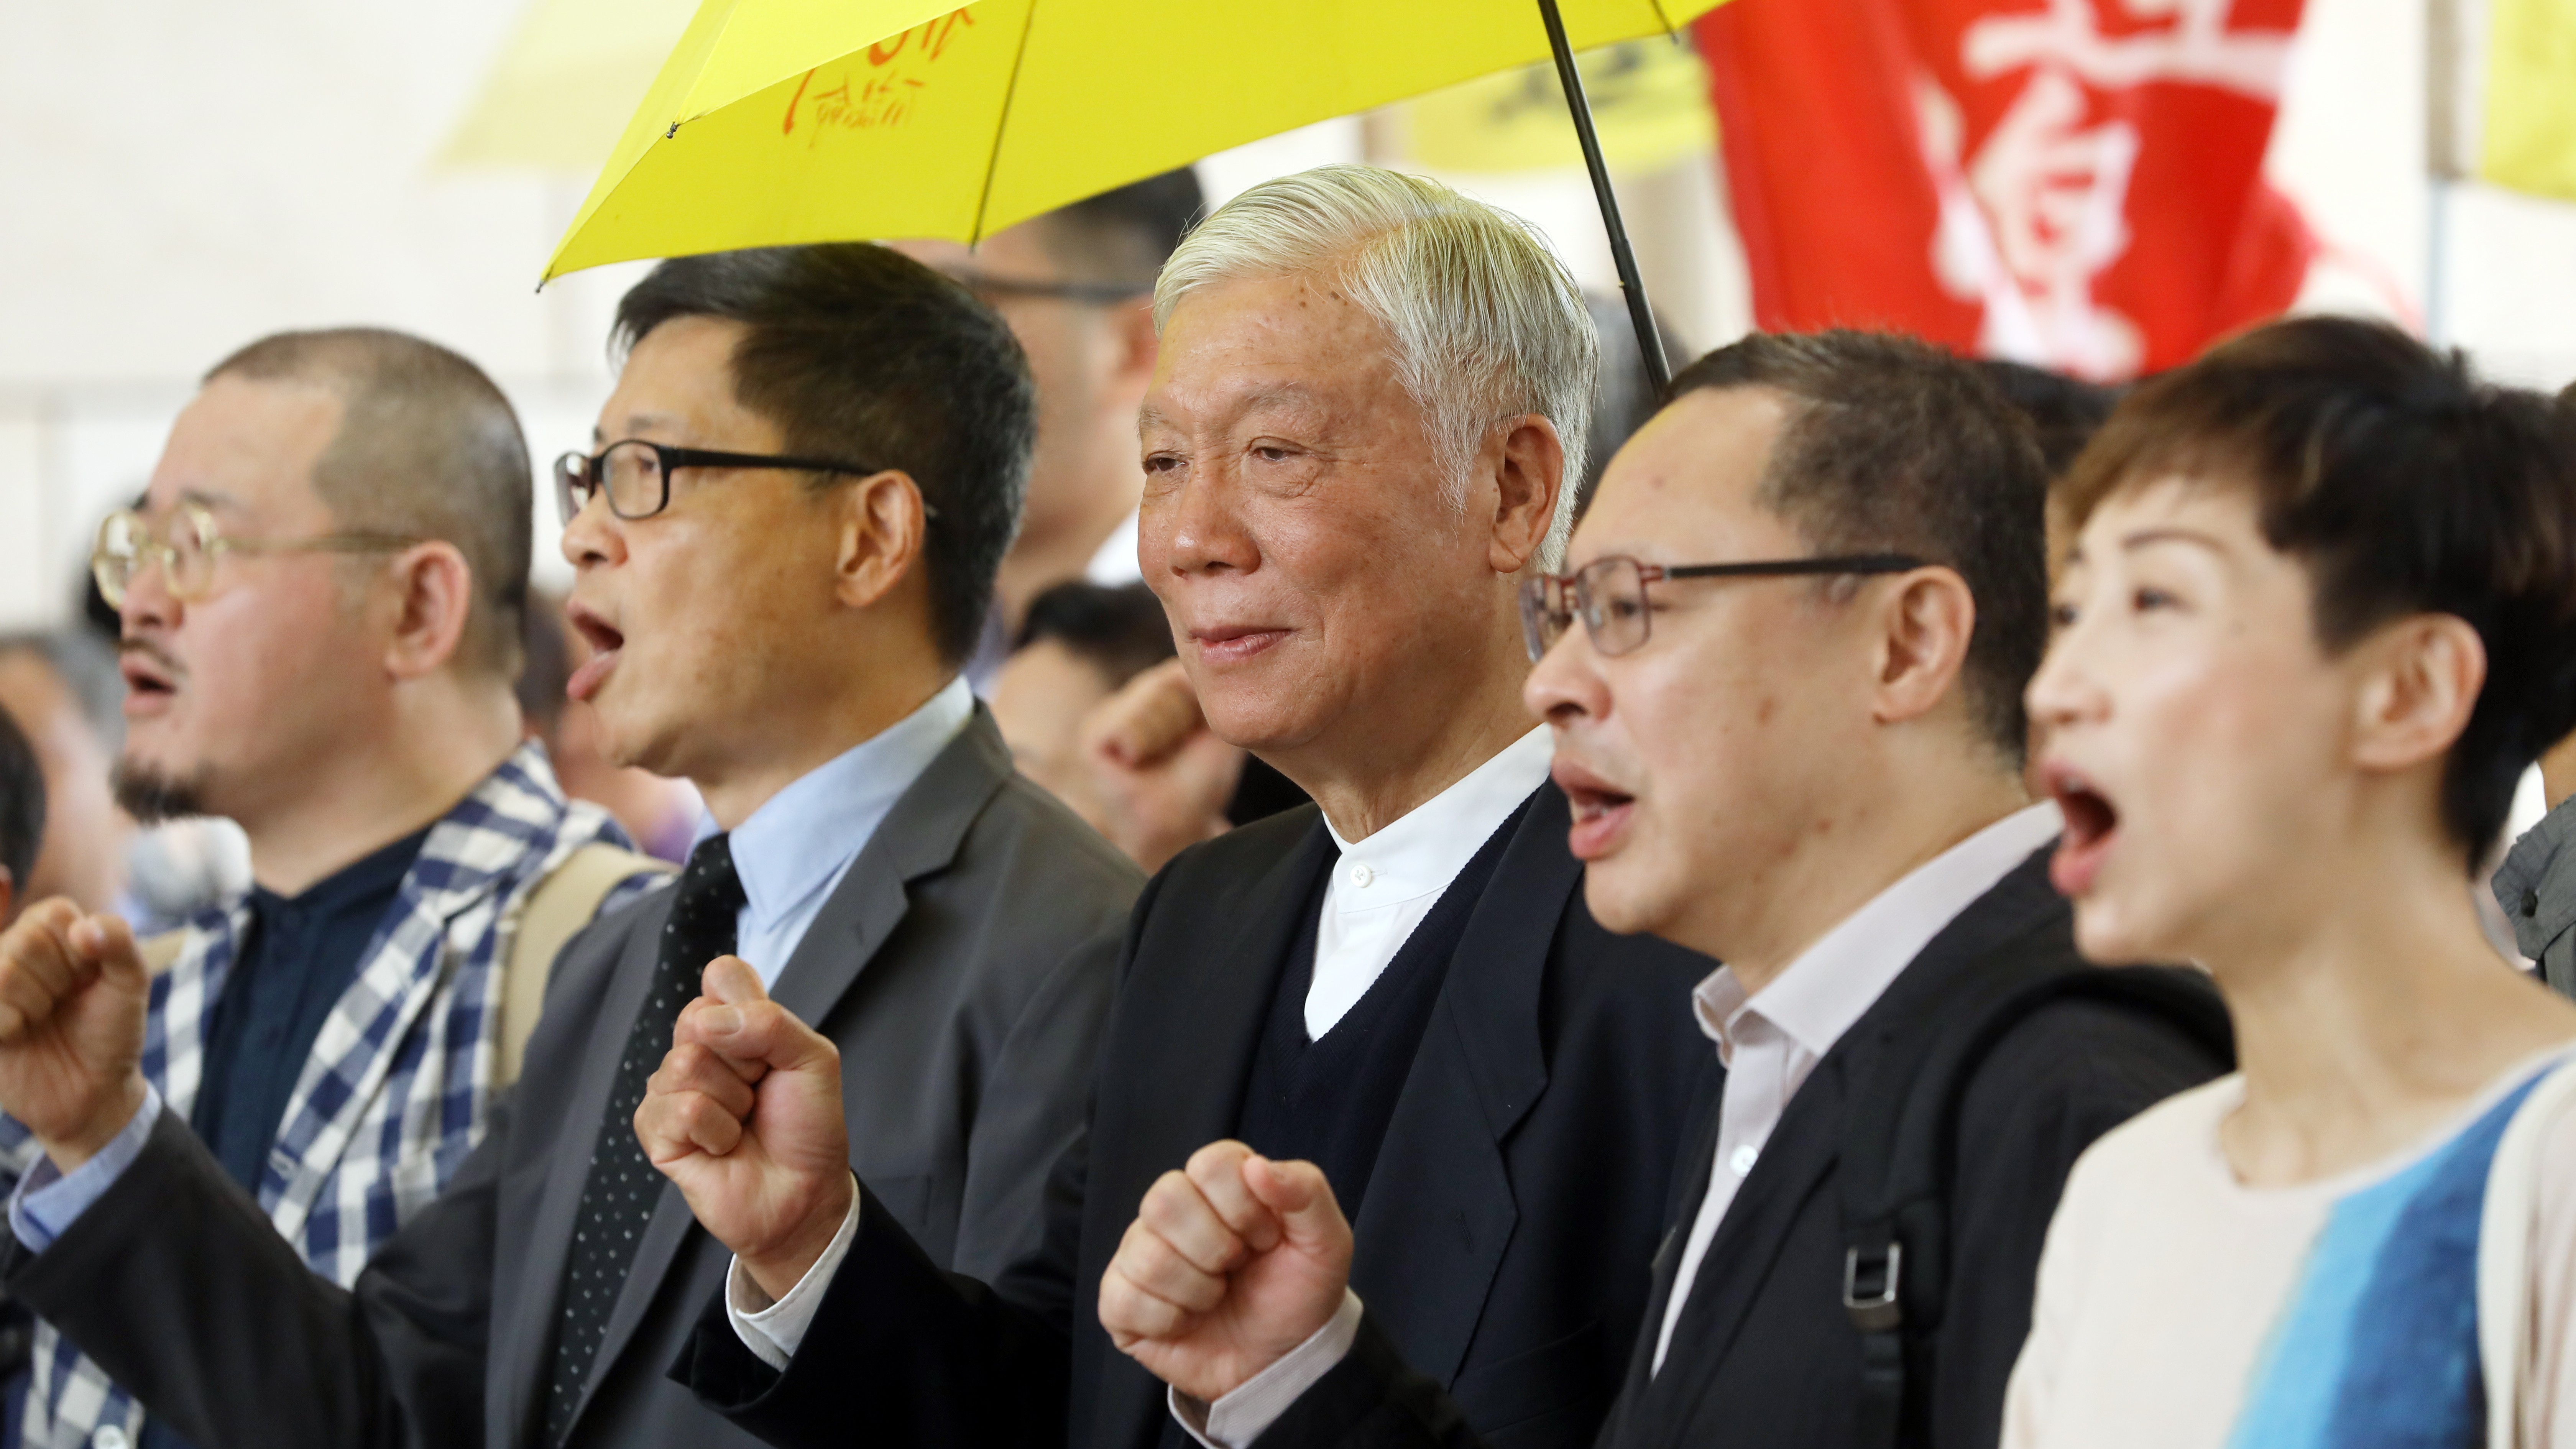 (From left) Lawmaker Shiu Ka-chun, co-founders of the Occupy movement Chan Kin-man, Chu Yiu-ming and Benny Tai Yiu-ting, and lawmaker Tanya Chan chant slogans outside the West Kowloon Court in Sham Shui Po, where they were tried for their participation in the Occupy protests, on April 10. Photo: Sam Tsang